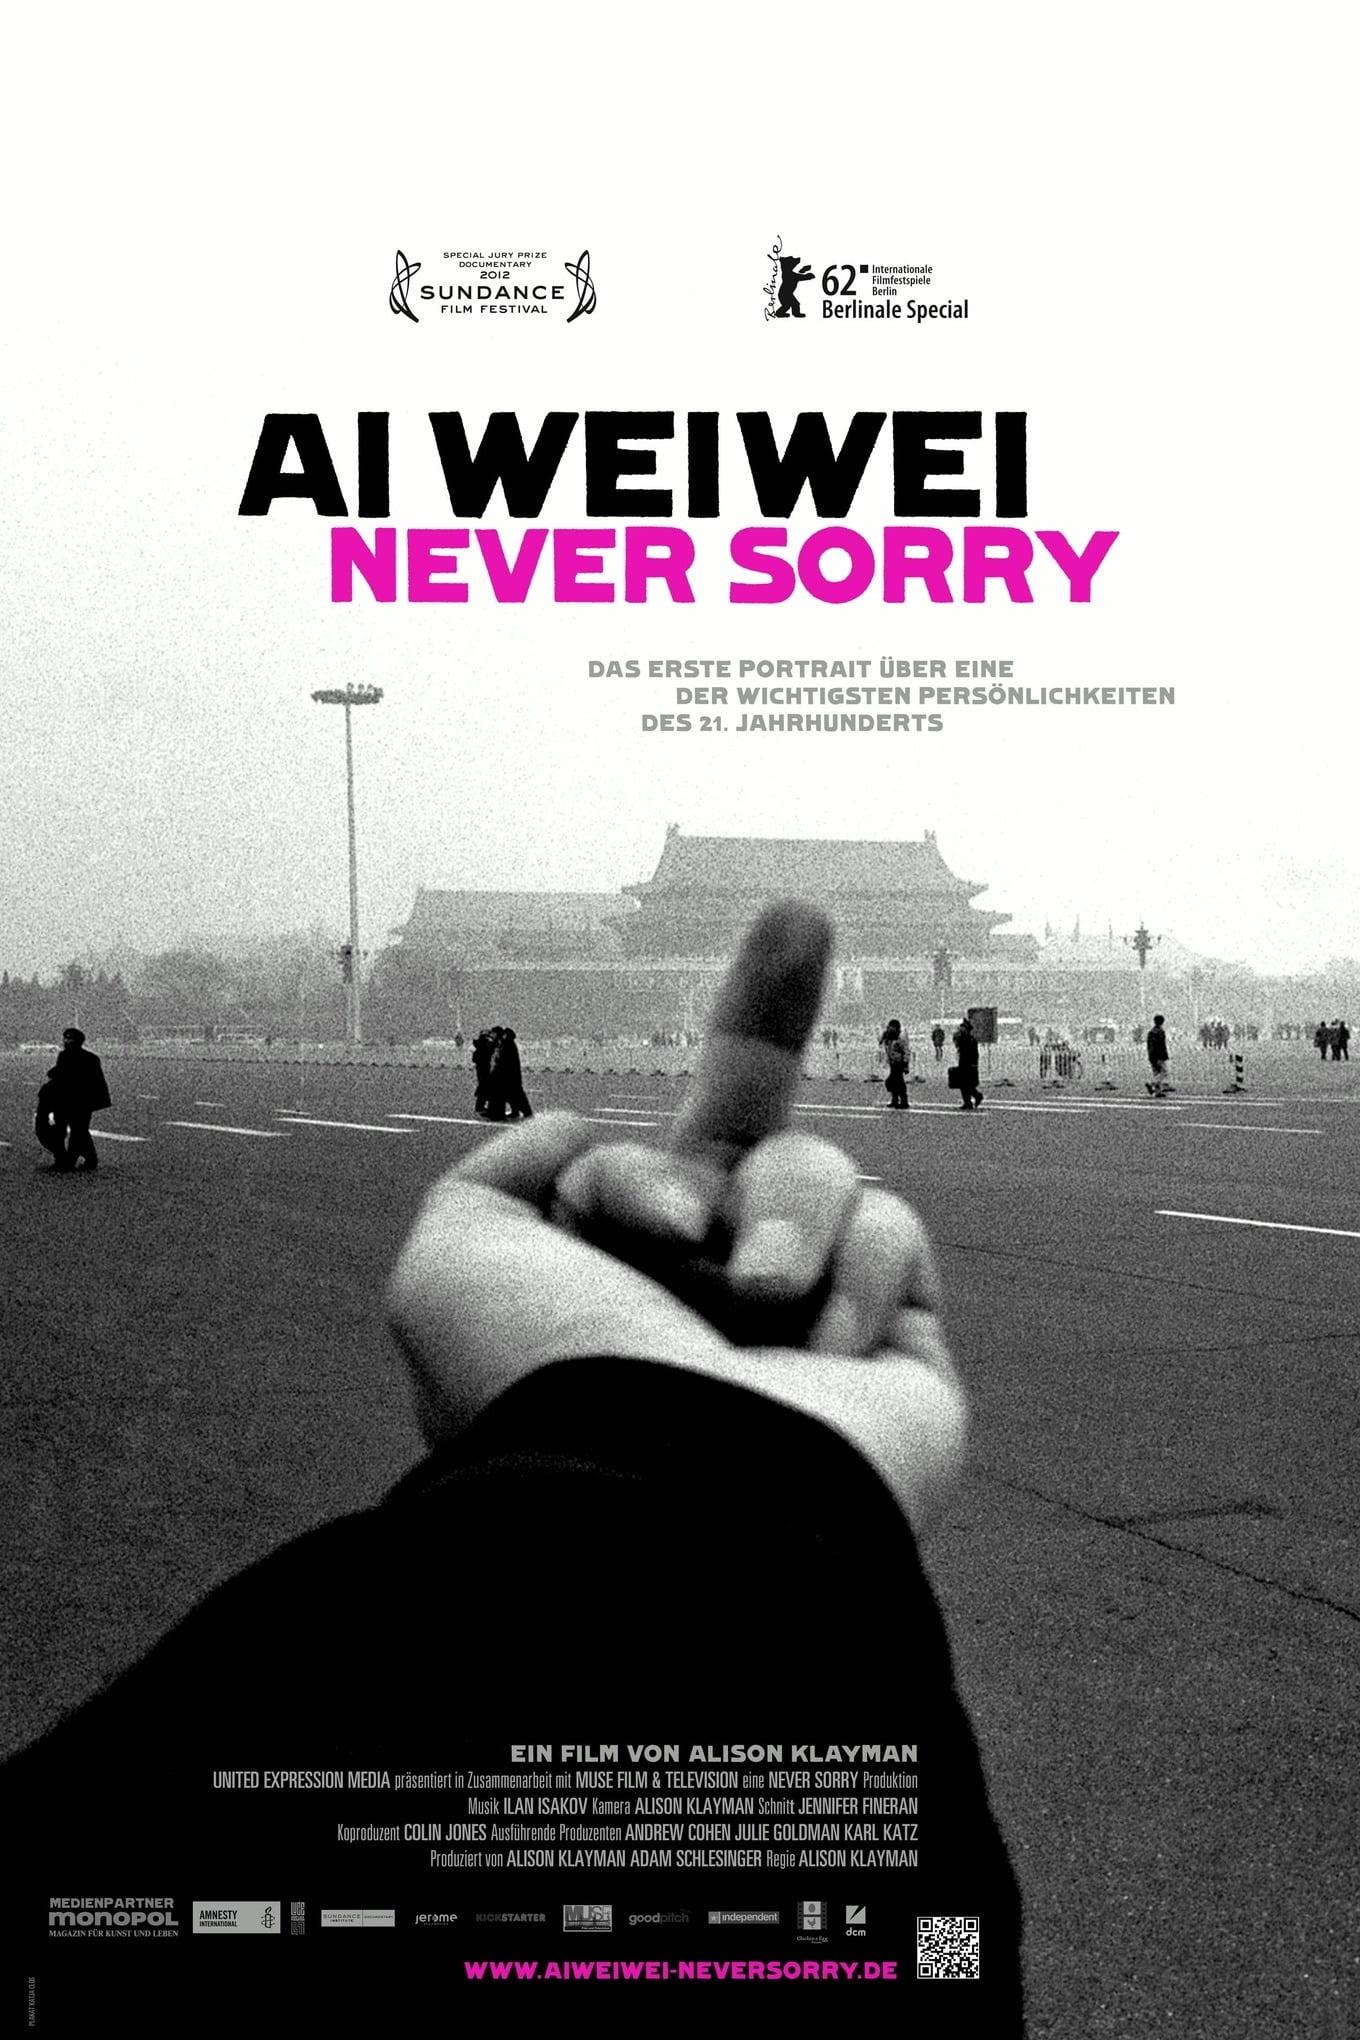 Ai Weiwei: Never Sorry poster